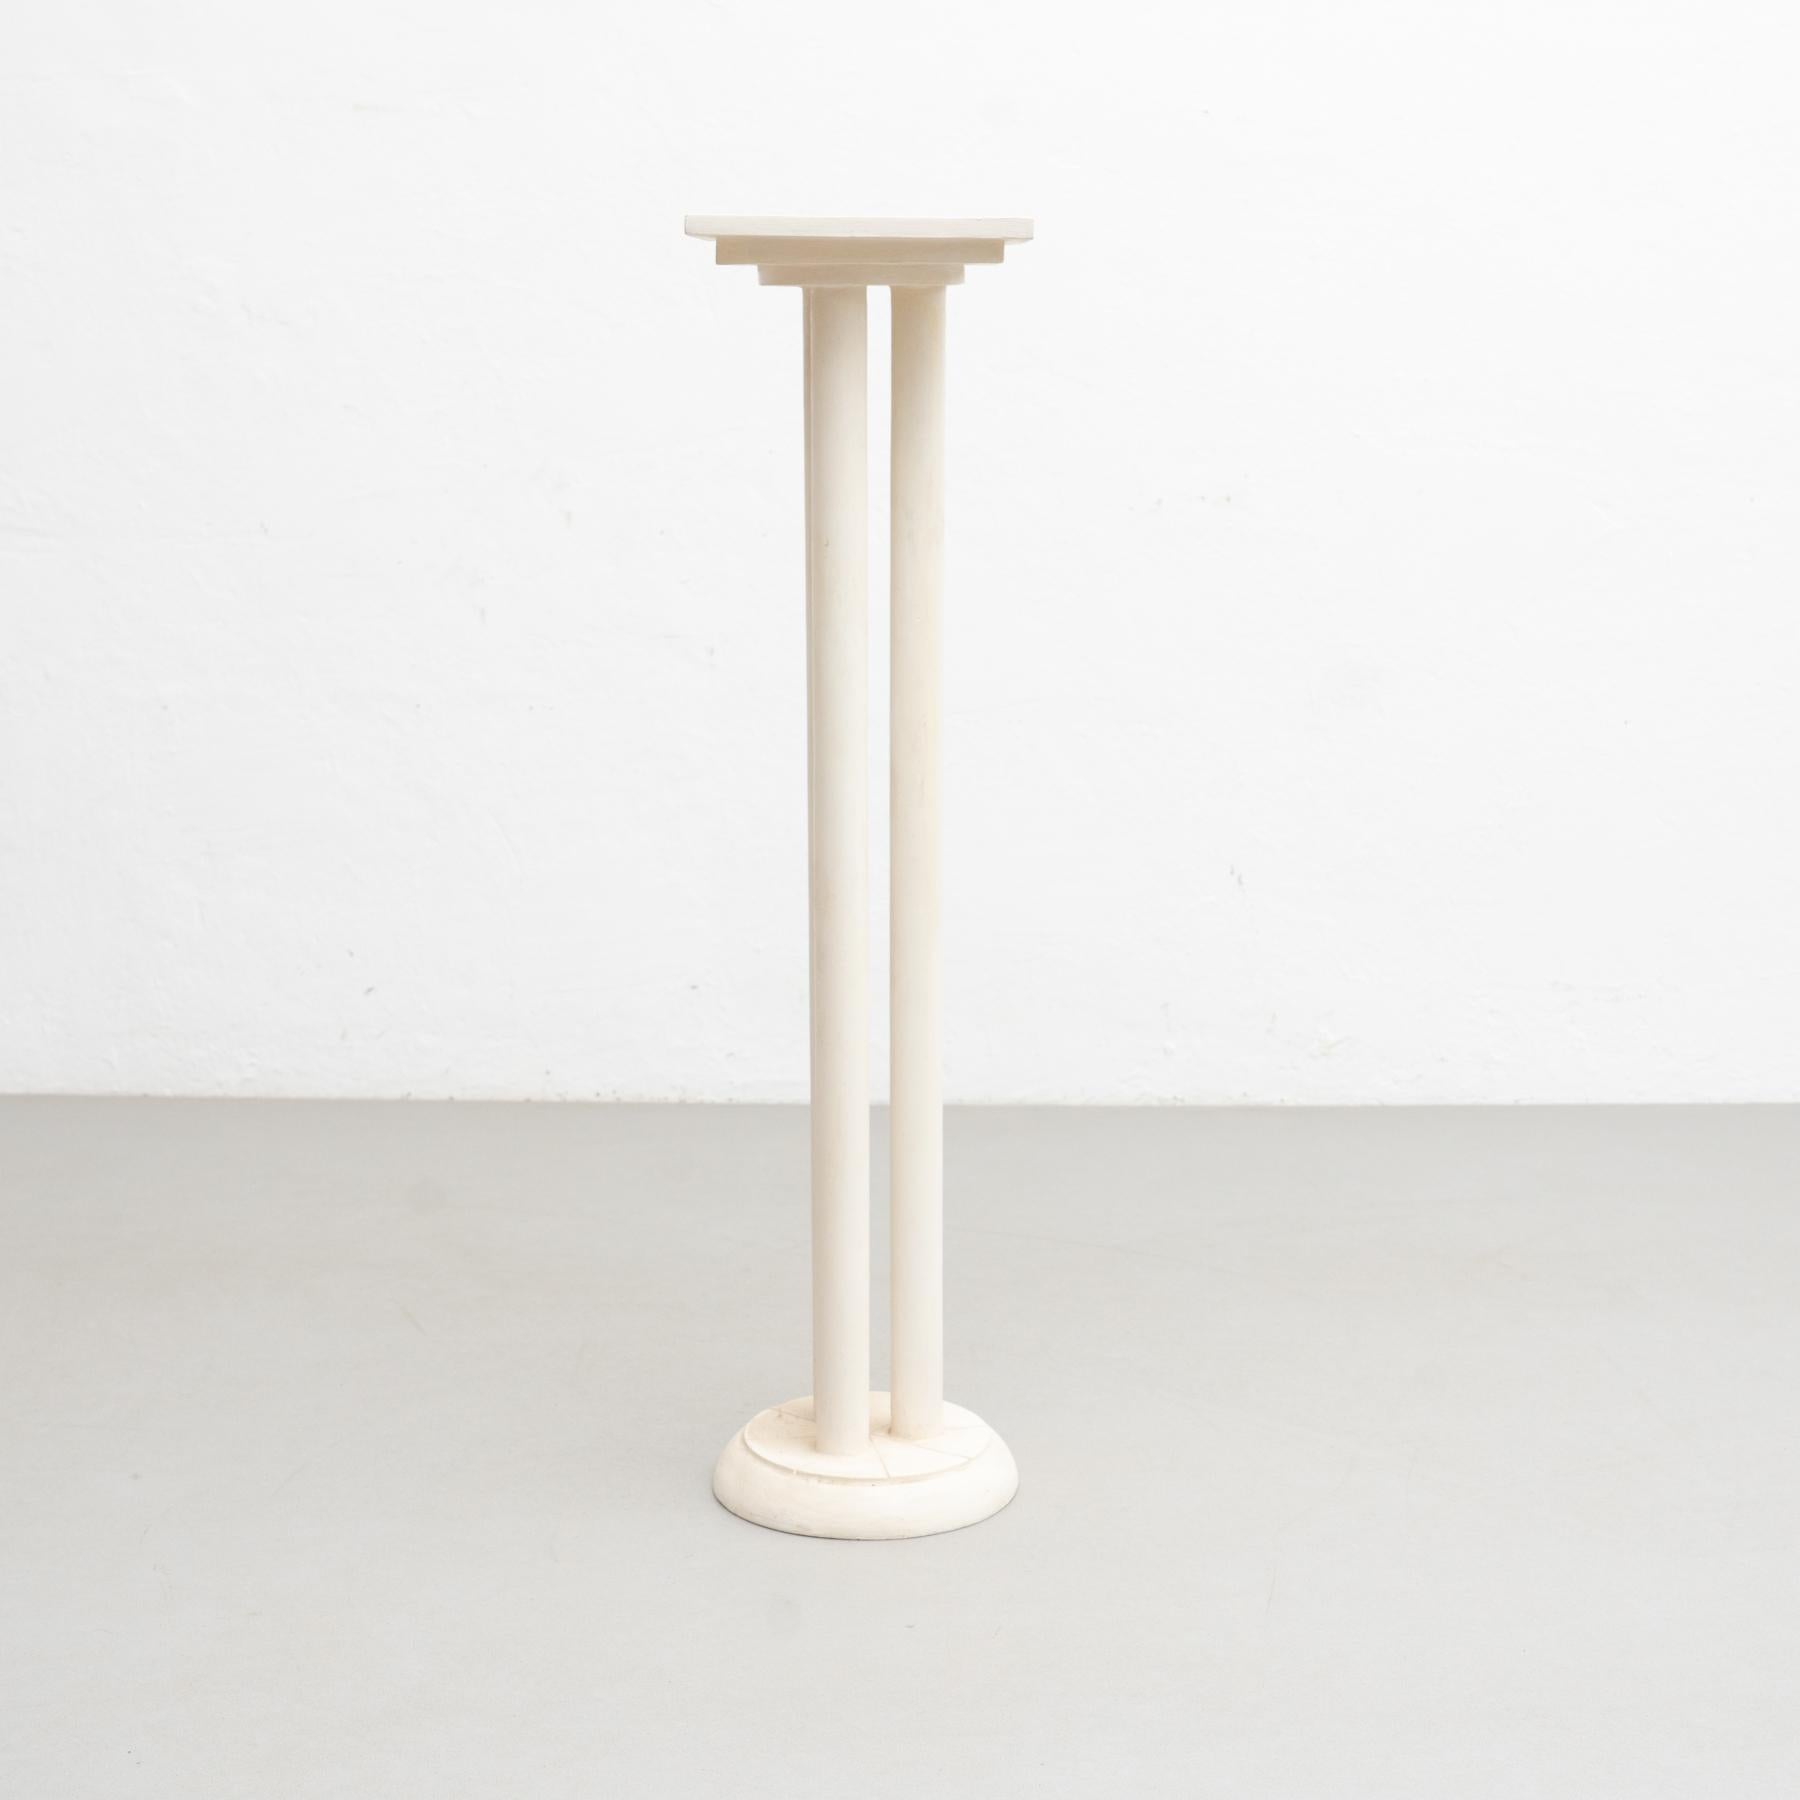 Antique plaster column stand.

Made in traditional Catalan atelier in Olot, Spain, circa 1950.

In original condition, with minor wear consistent with age and use, preserving a beautiful patina.

Materials:
Plaster.
 